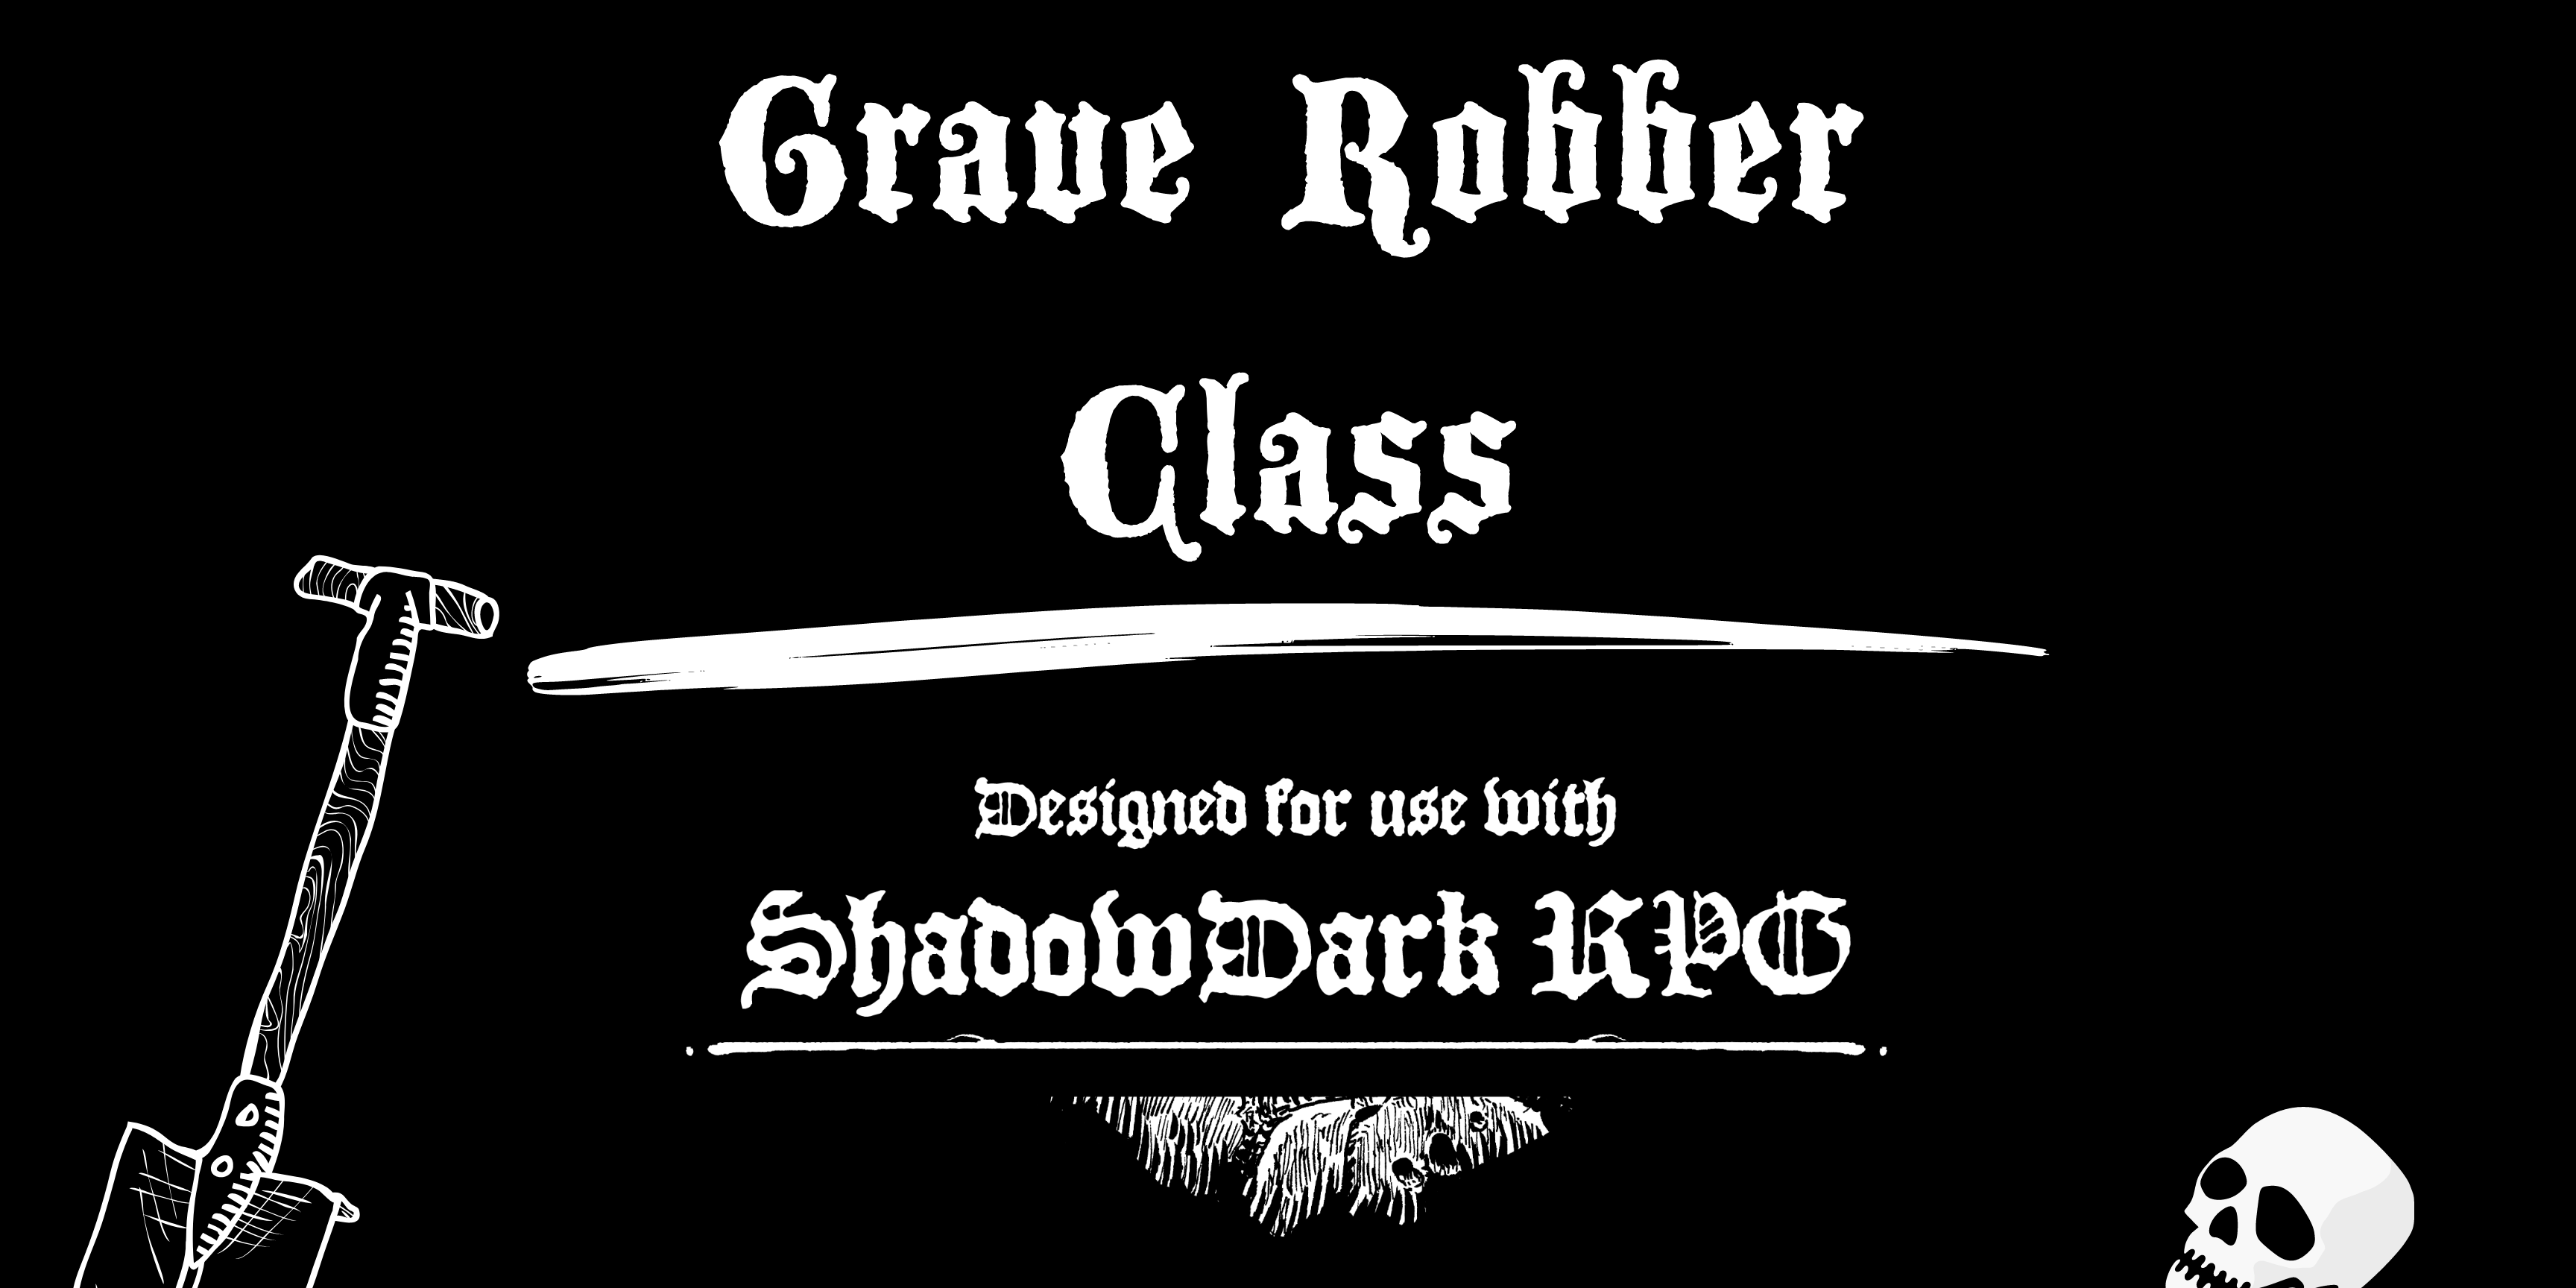 The grave robber - Designed for use with Shadowdark RPG